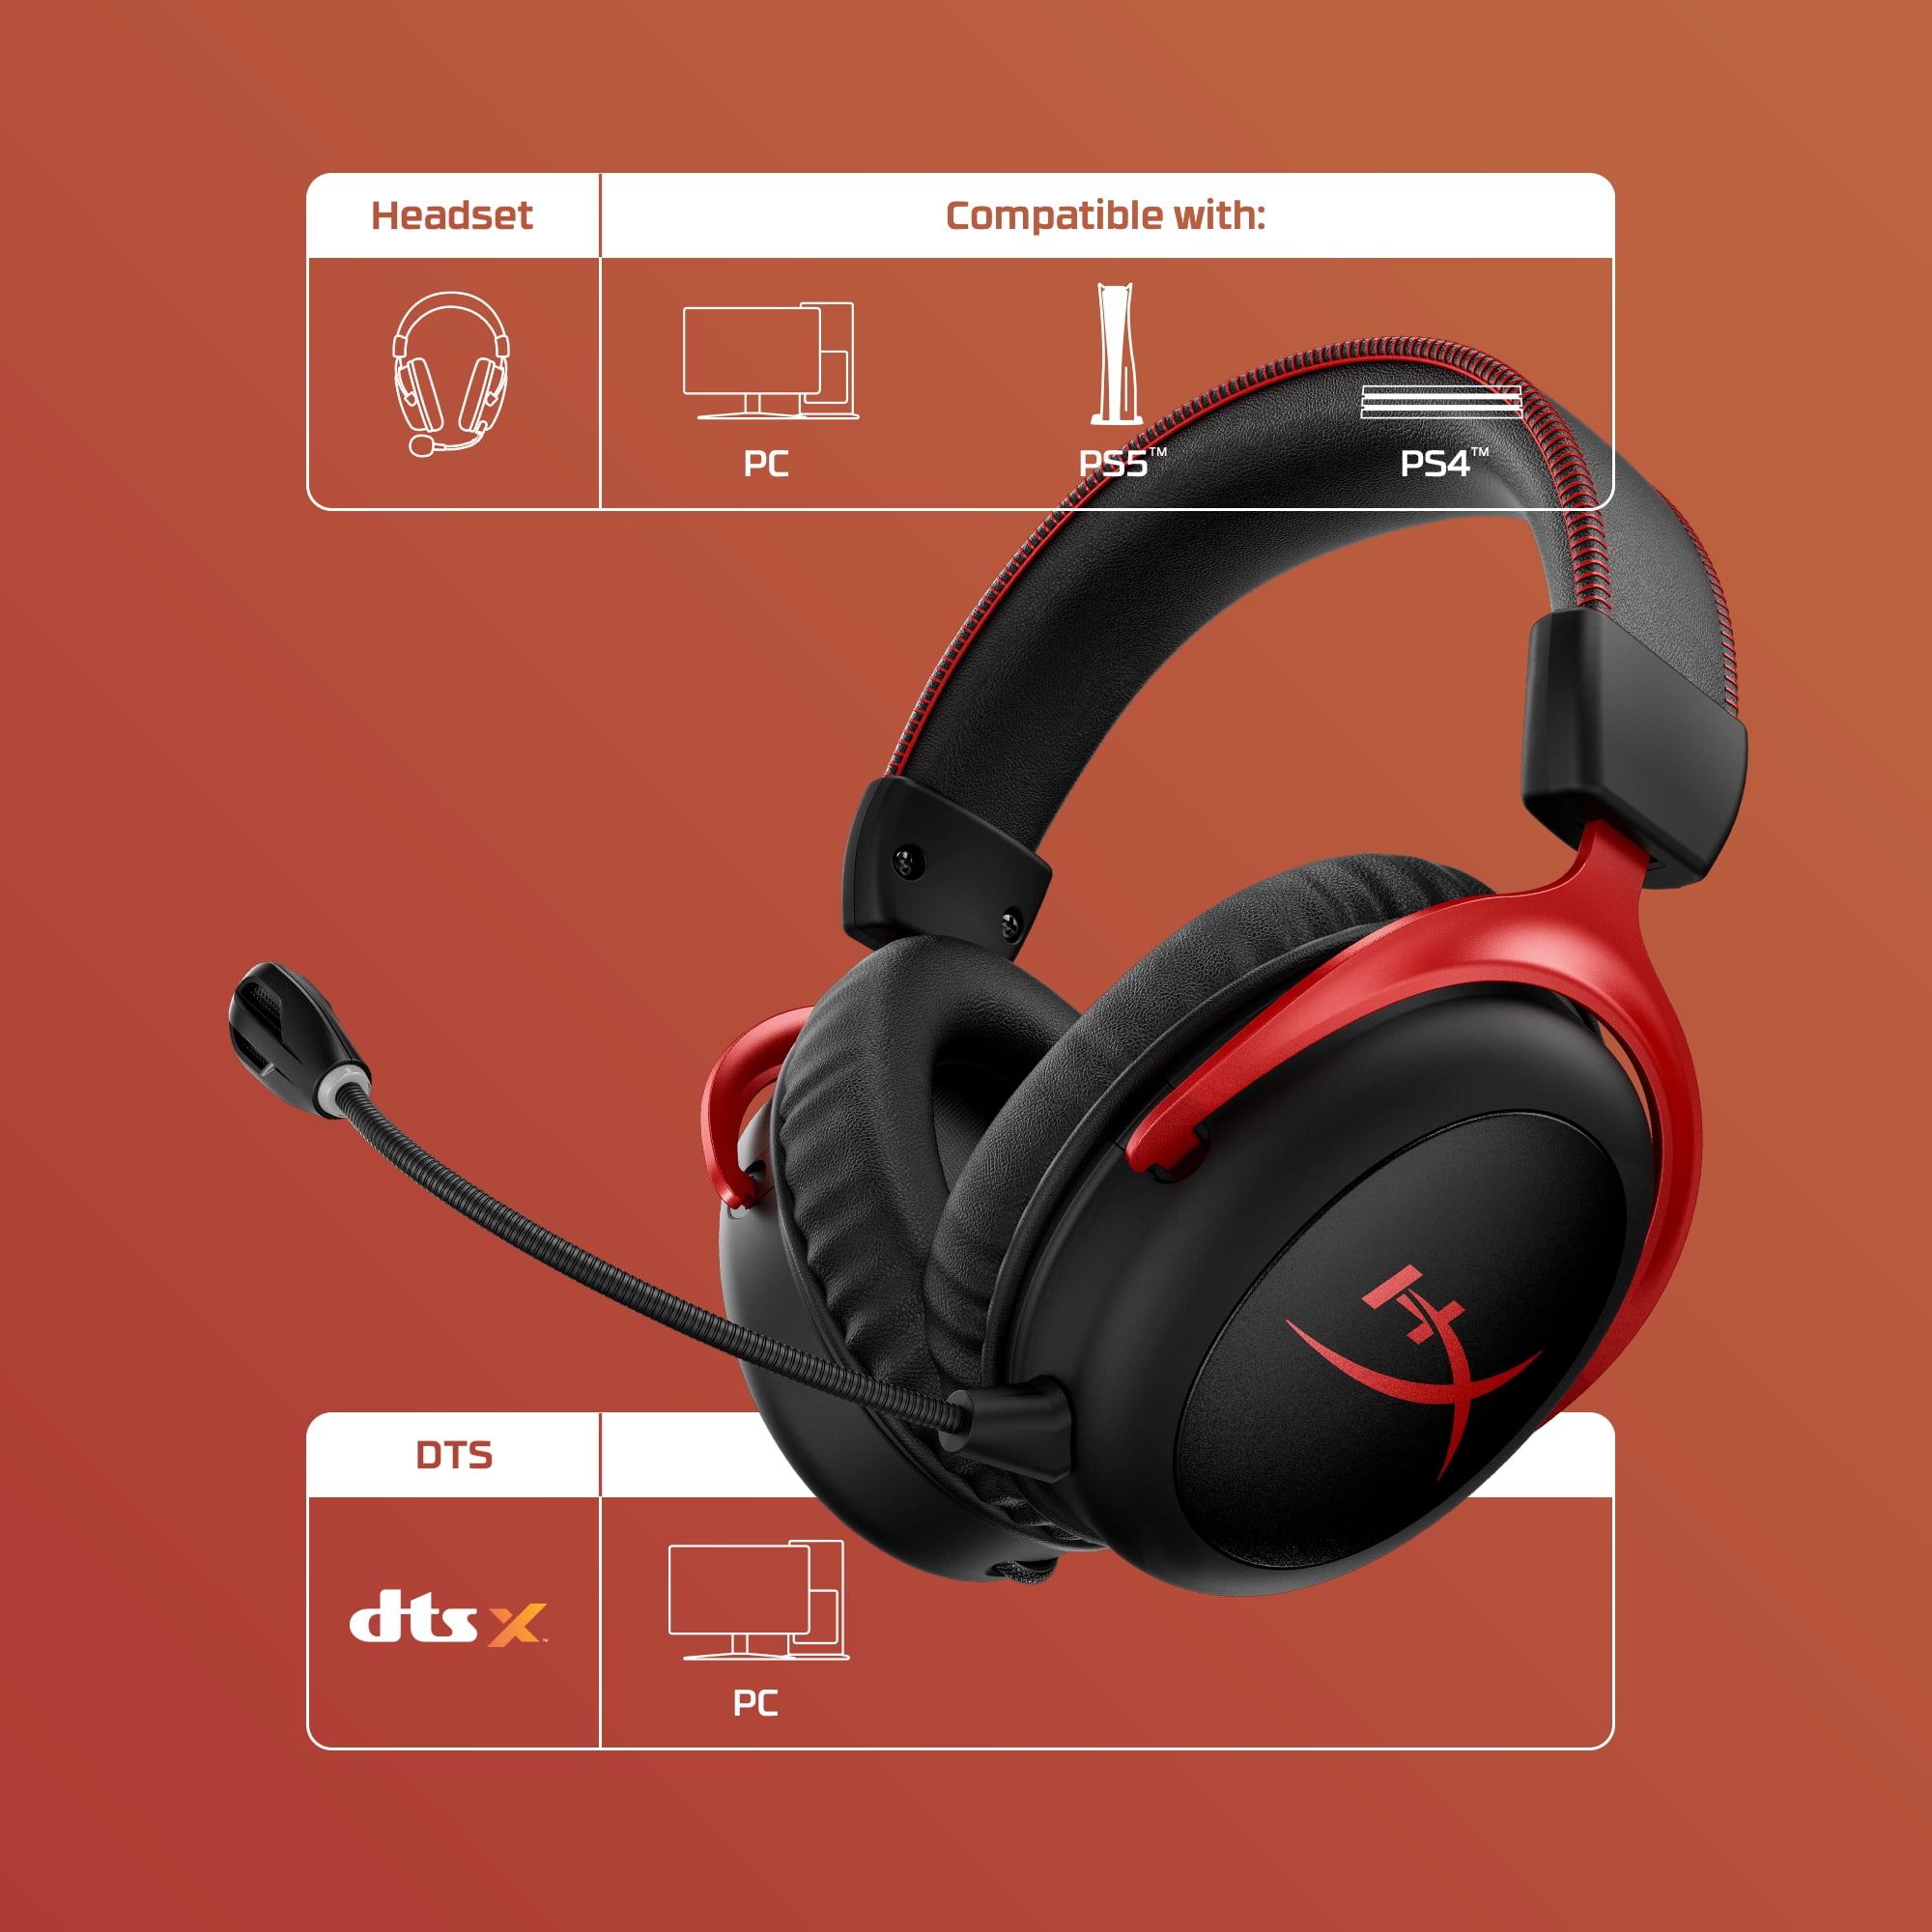 wenselijk garage Eentonig HyperX Cloud II Wireless - Gaming Headset for PC, PS4/PS5, Nintendo Switch,  Long Lasting Battery Up to 30 Hours, 7.1 Surround Sound, Memory Foam,  Detachable Noise Cancelling Microphone, Mic Monitoring - Walmart.com